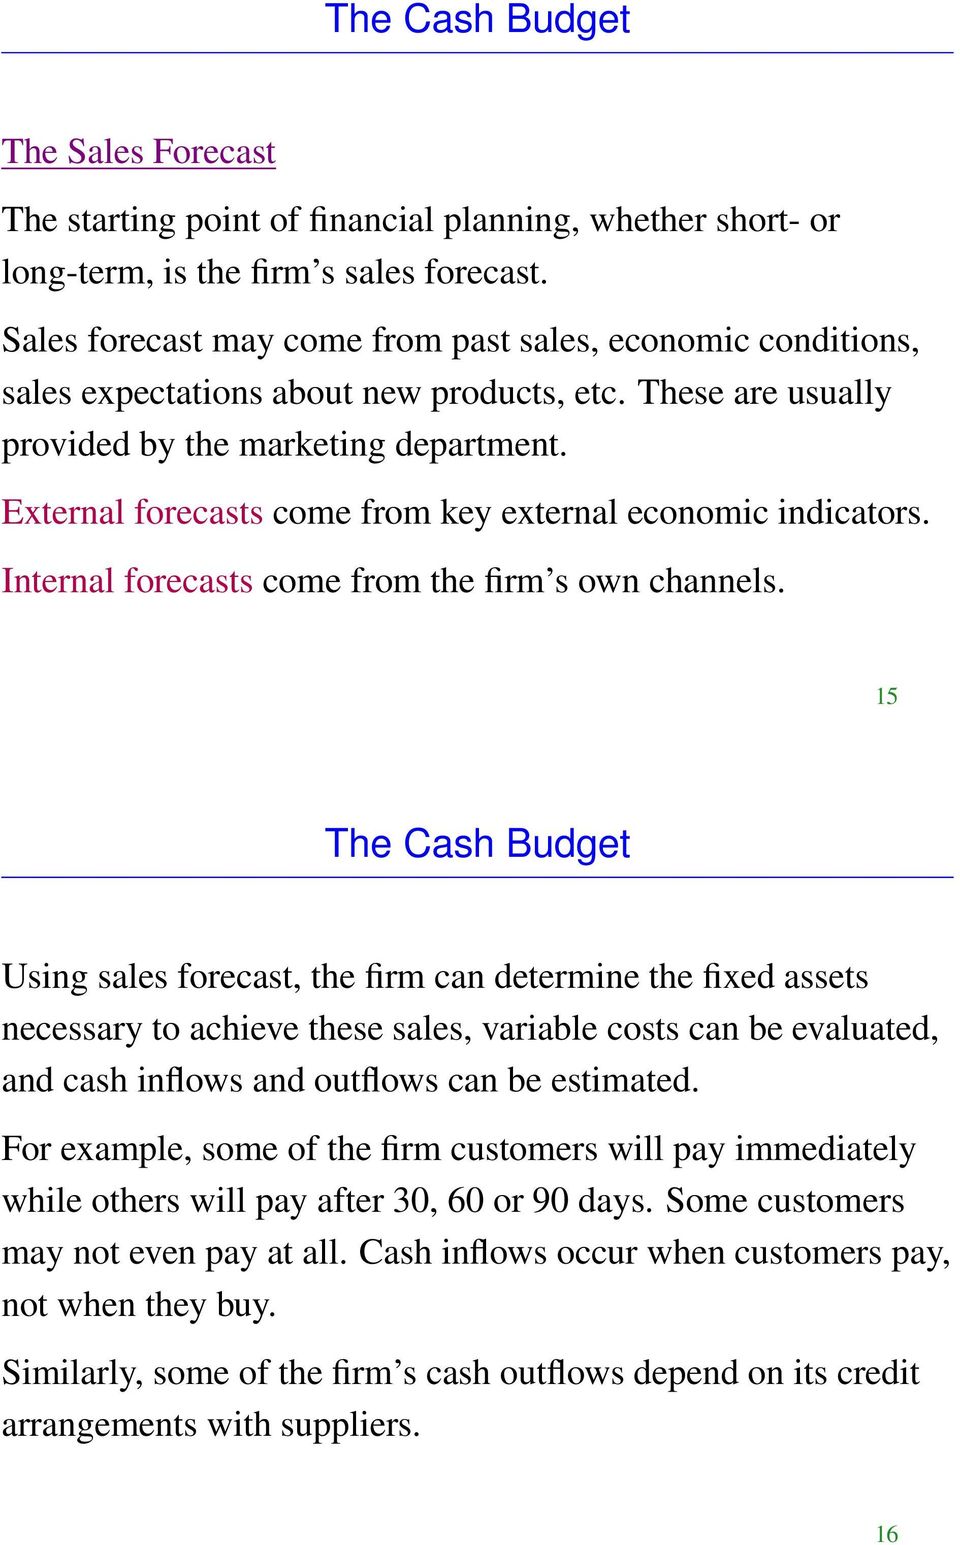 External forecasts come from key external economic indicators. Internal forecasts come from the firm s own channels.